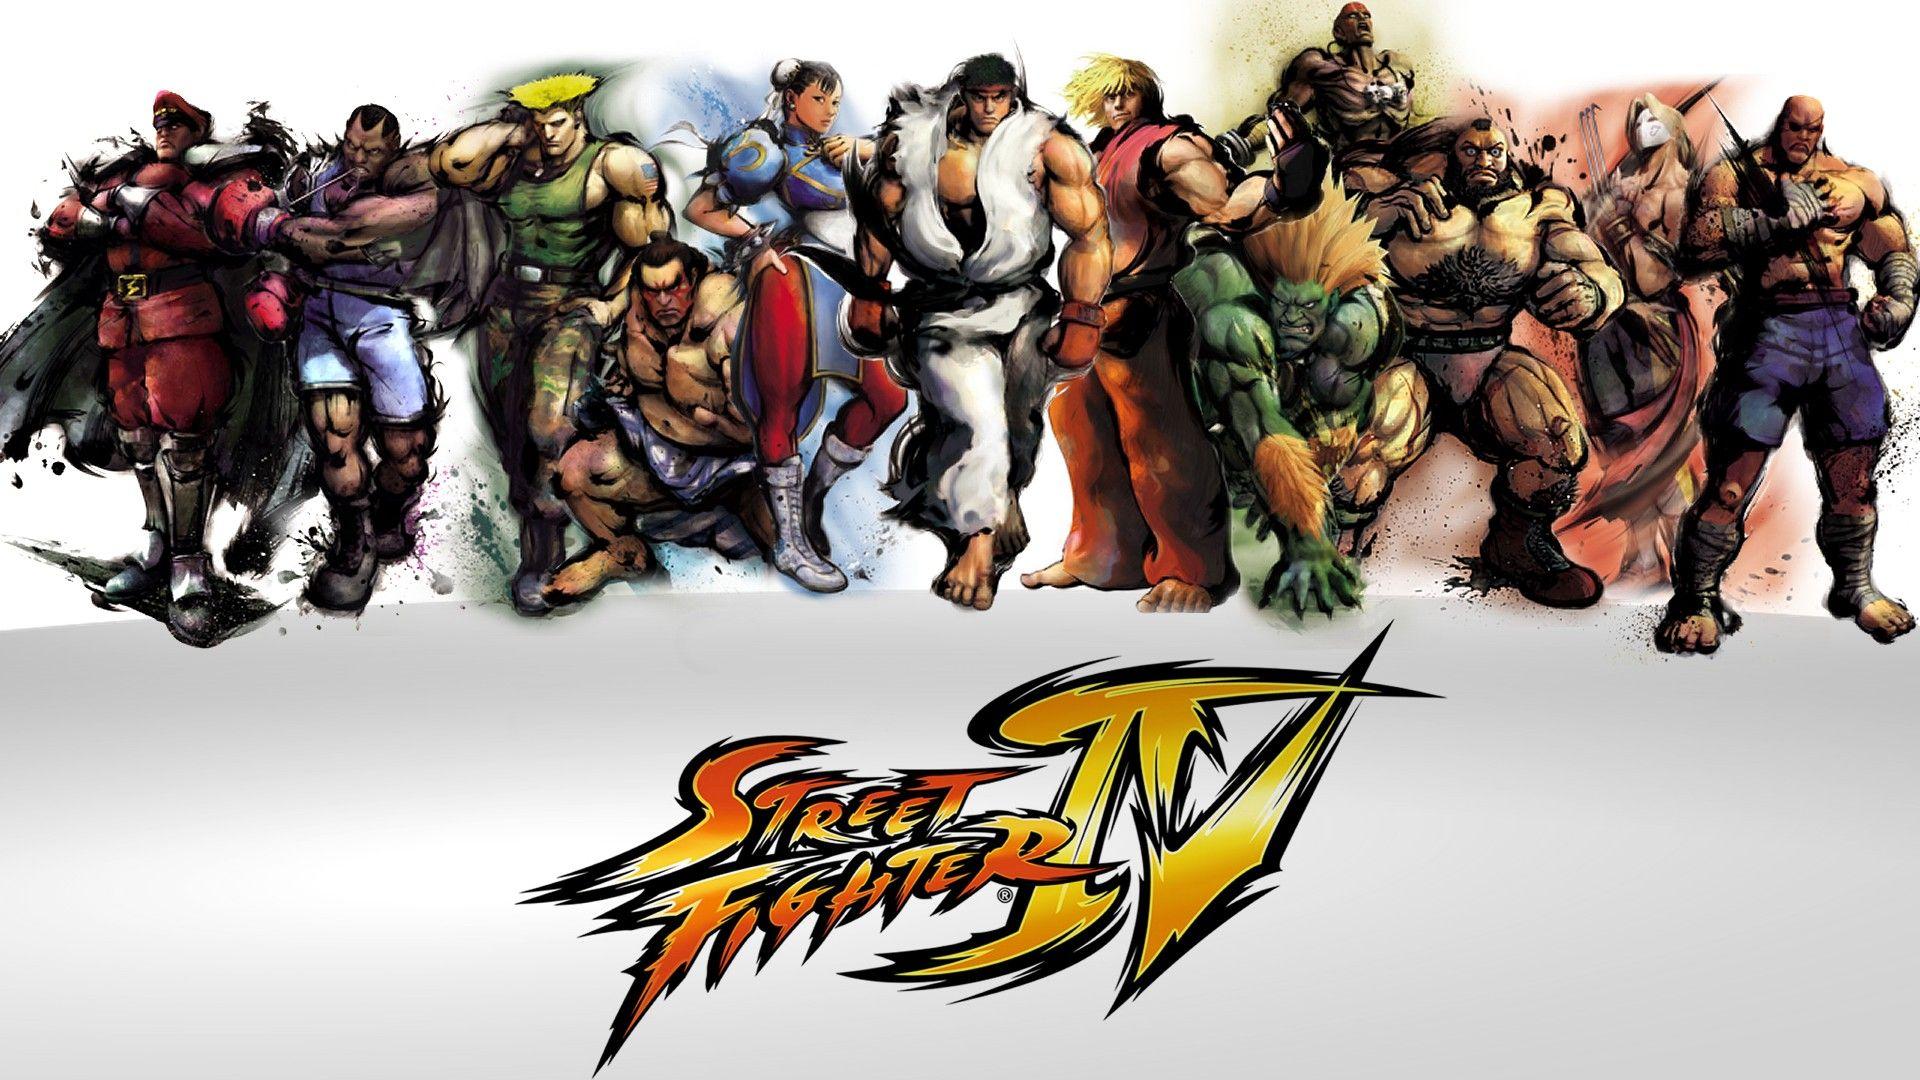 Street Fighter IV Wallpapers - Wallpaper Cave